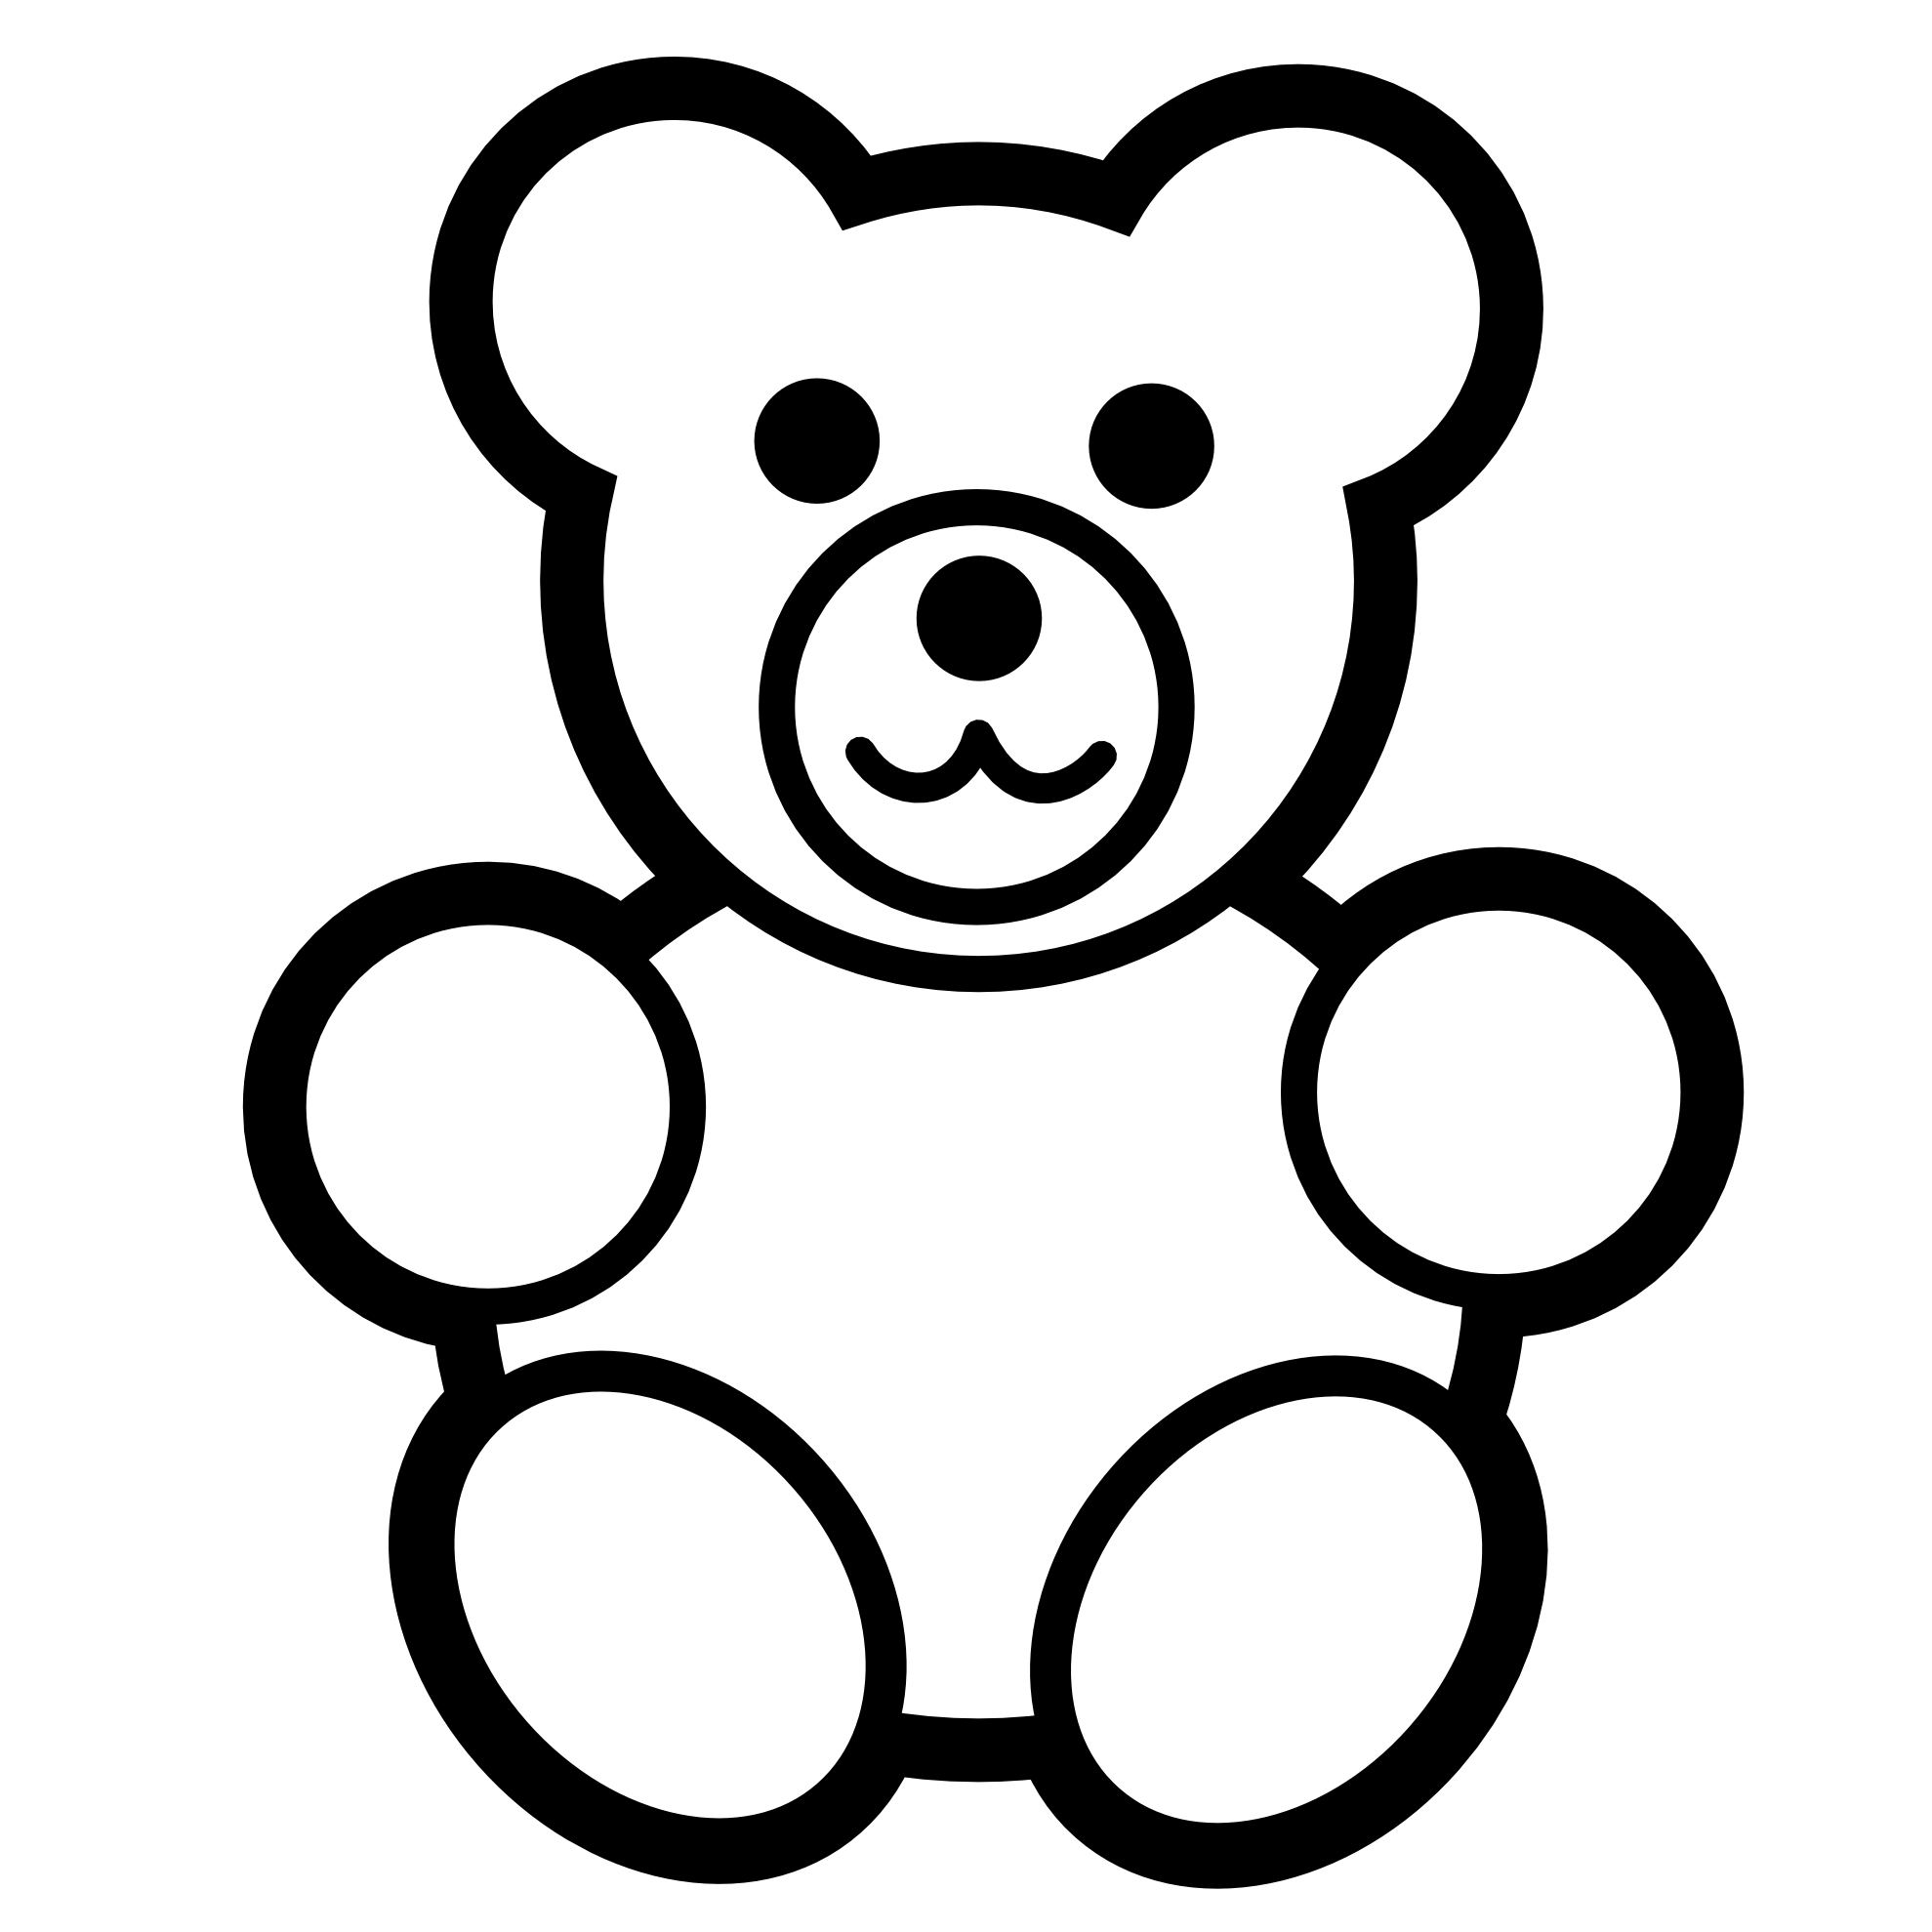 Teddy bear outline clipart free clipart images 2